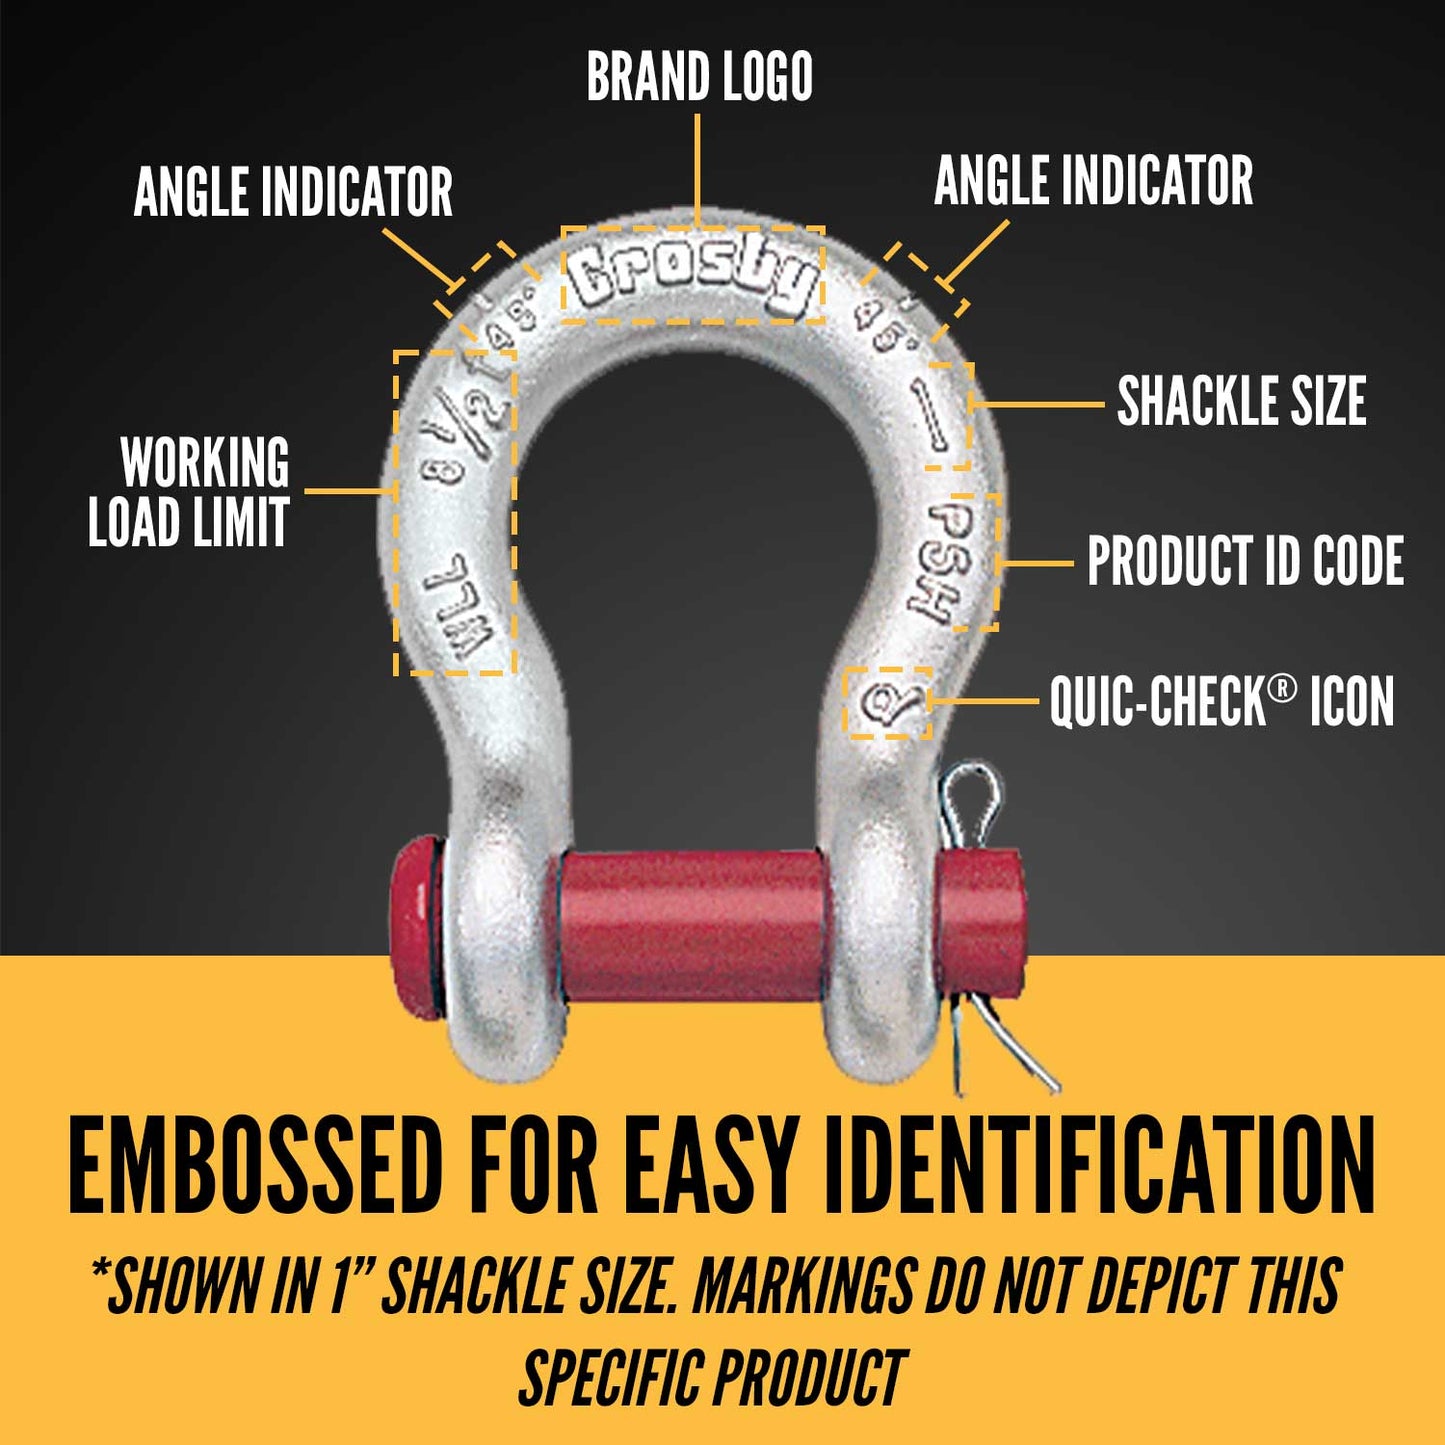 3/4" Crosby® Round Pin Anchor Shackle | G-213 - 4.75 Ton embossed for easy identification